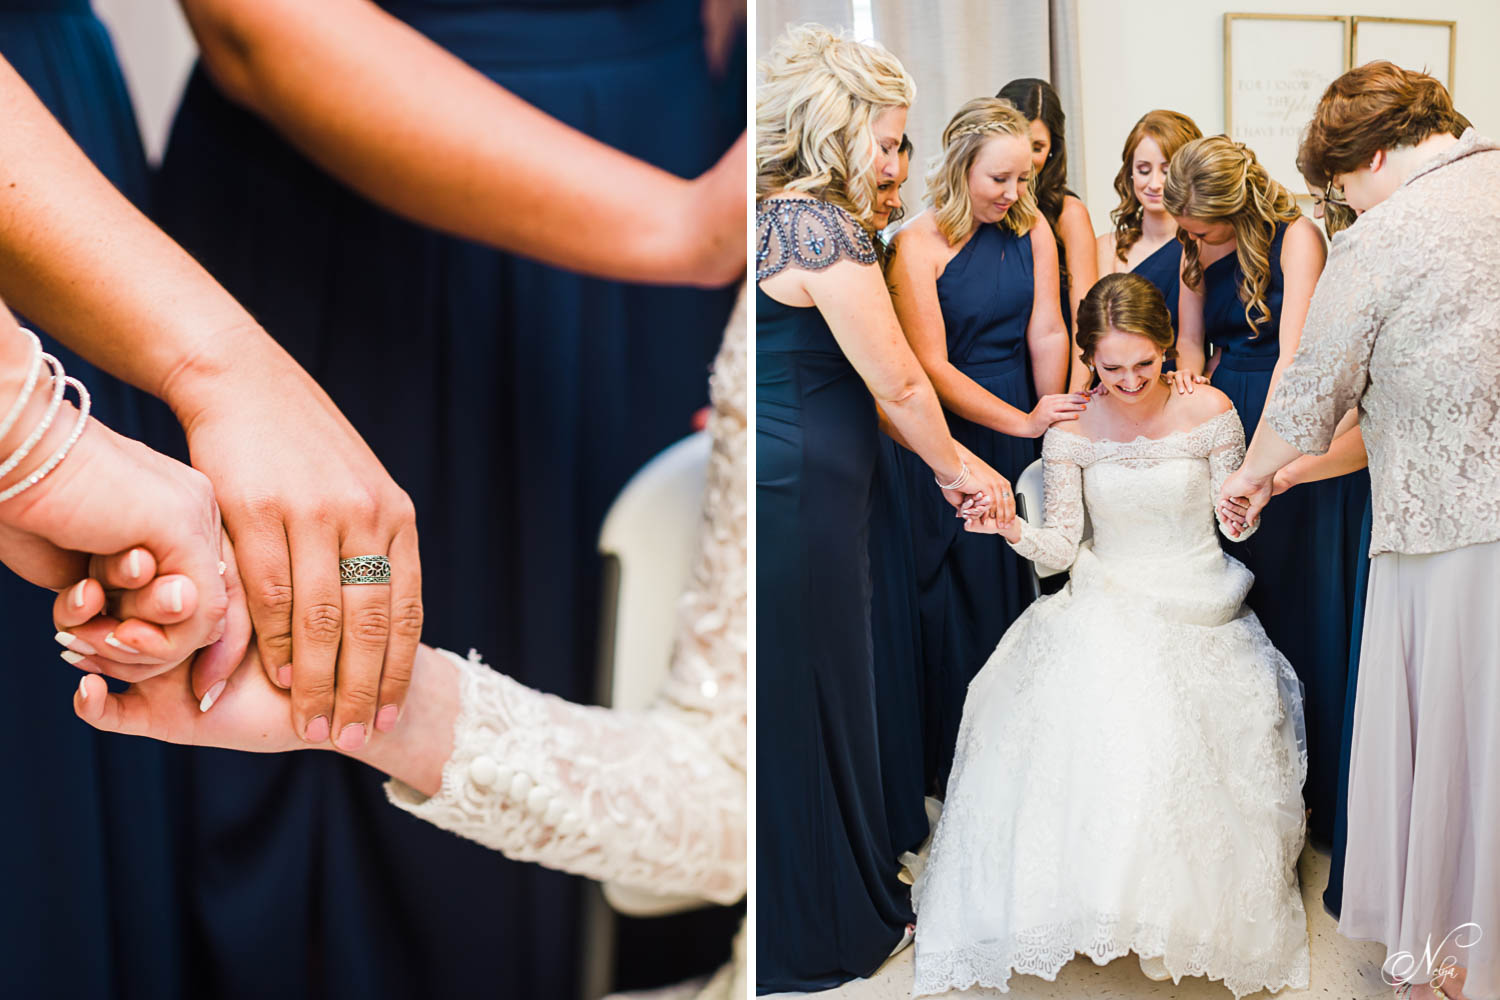 Close up of hands praying. And bride sitting in chair with bridesmaids and moms praying with the bride before her wedding